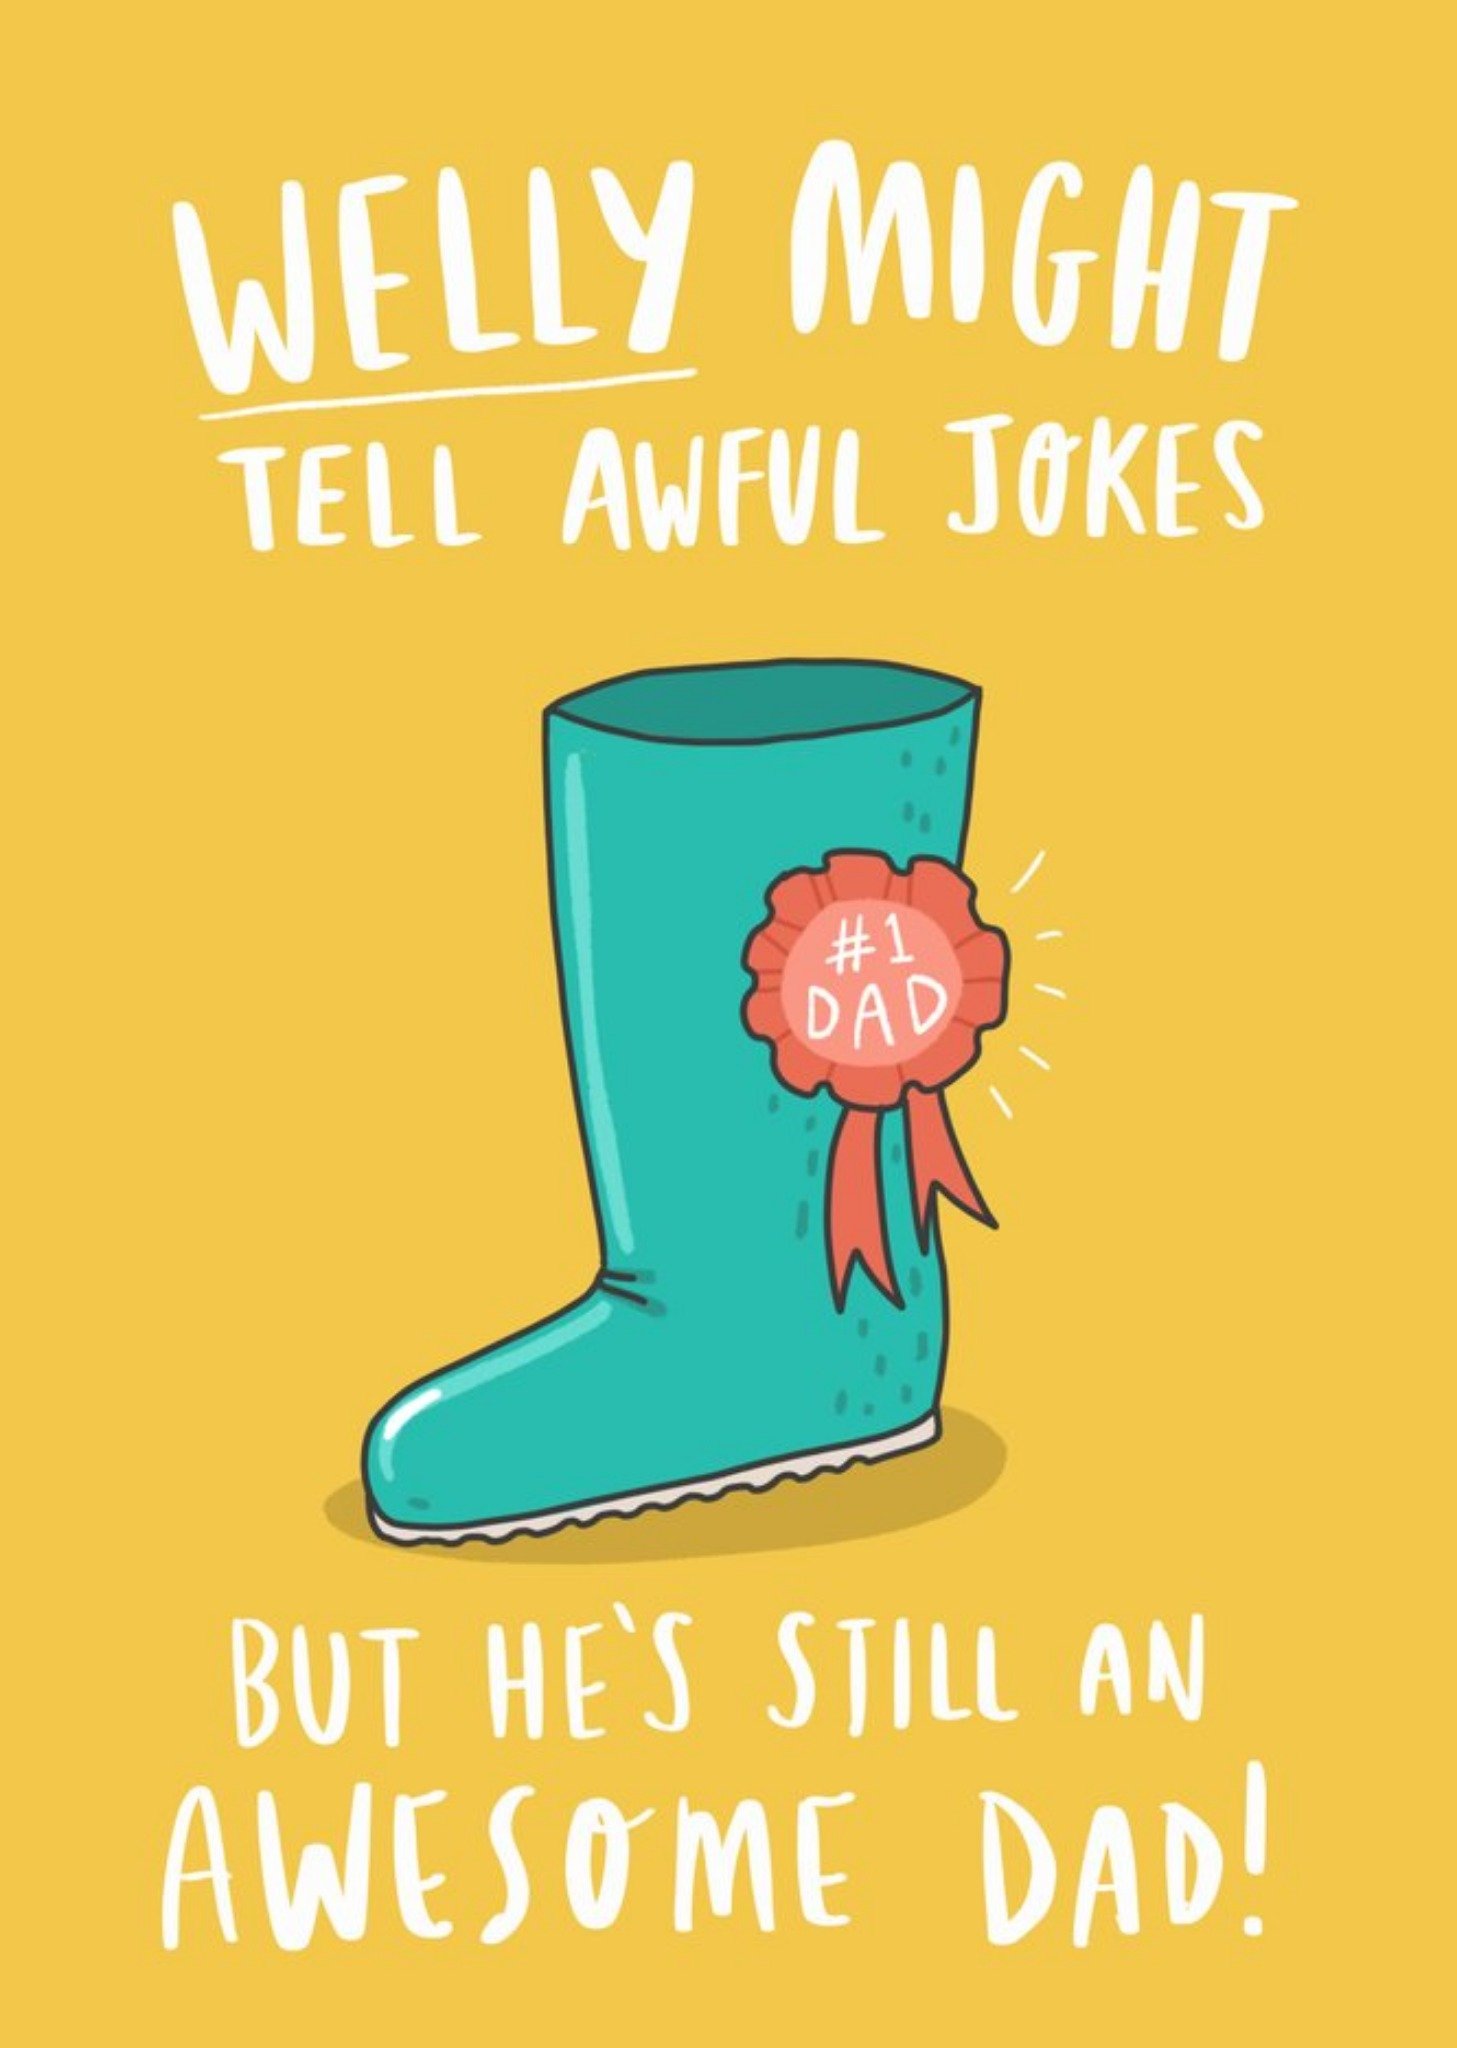 Moonpig Funny Pun Welly Might Tell Awful Jokes Awesome Dad Card, Large